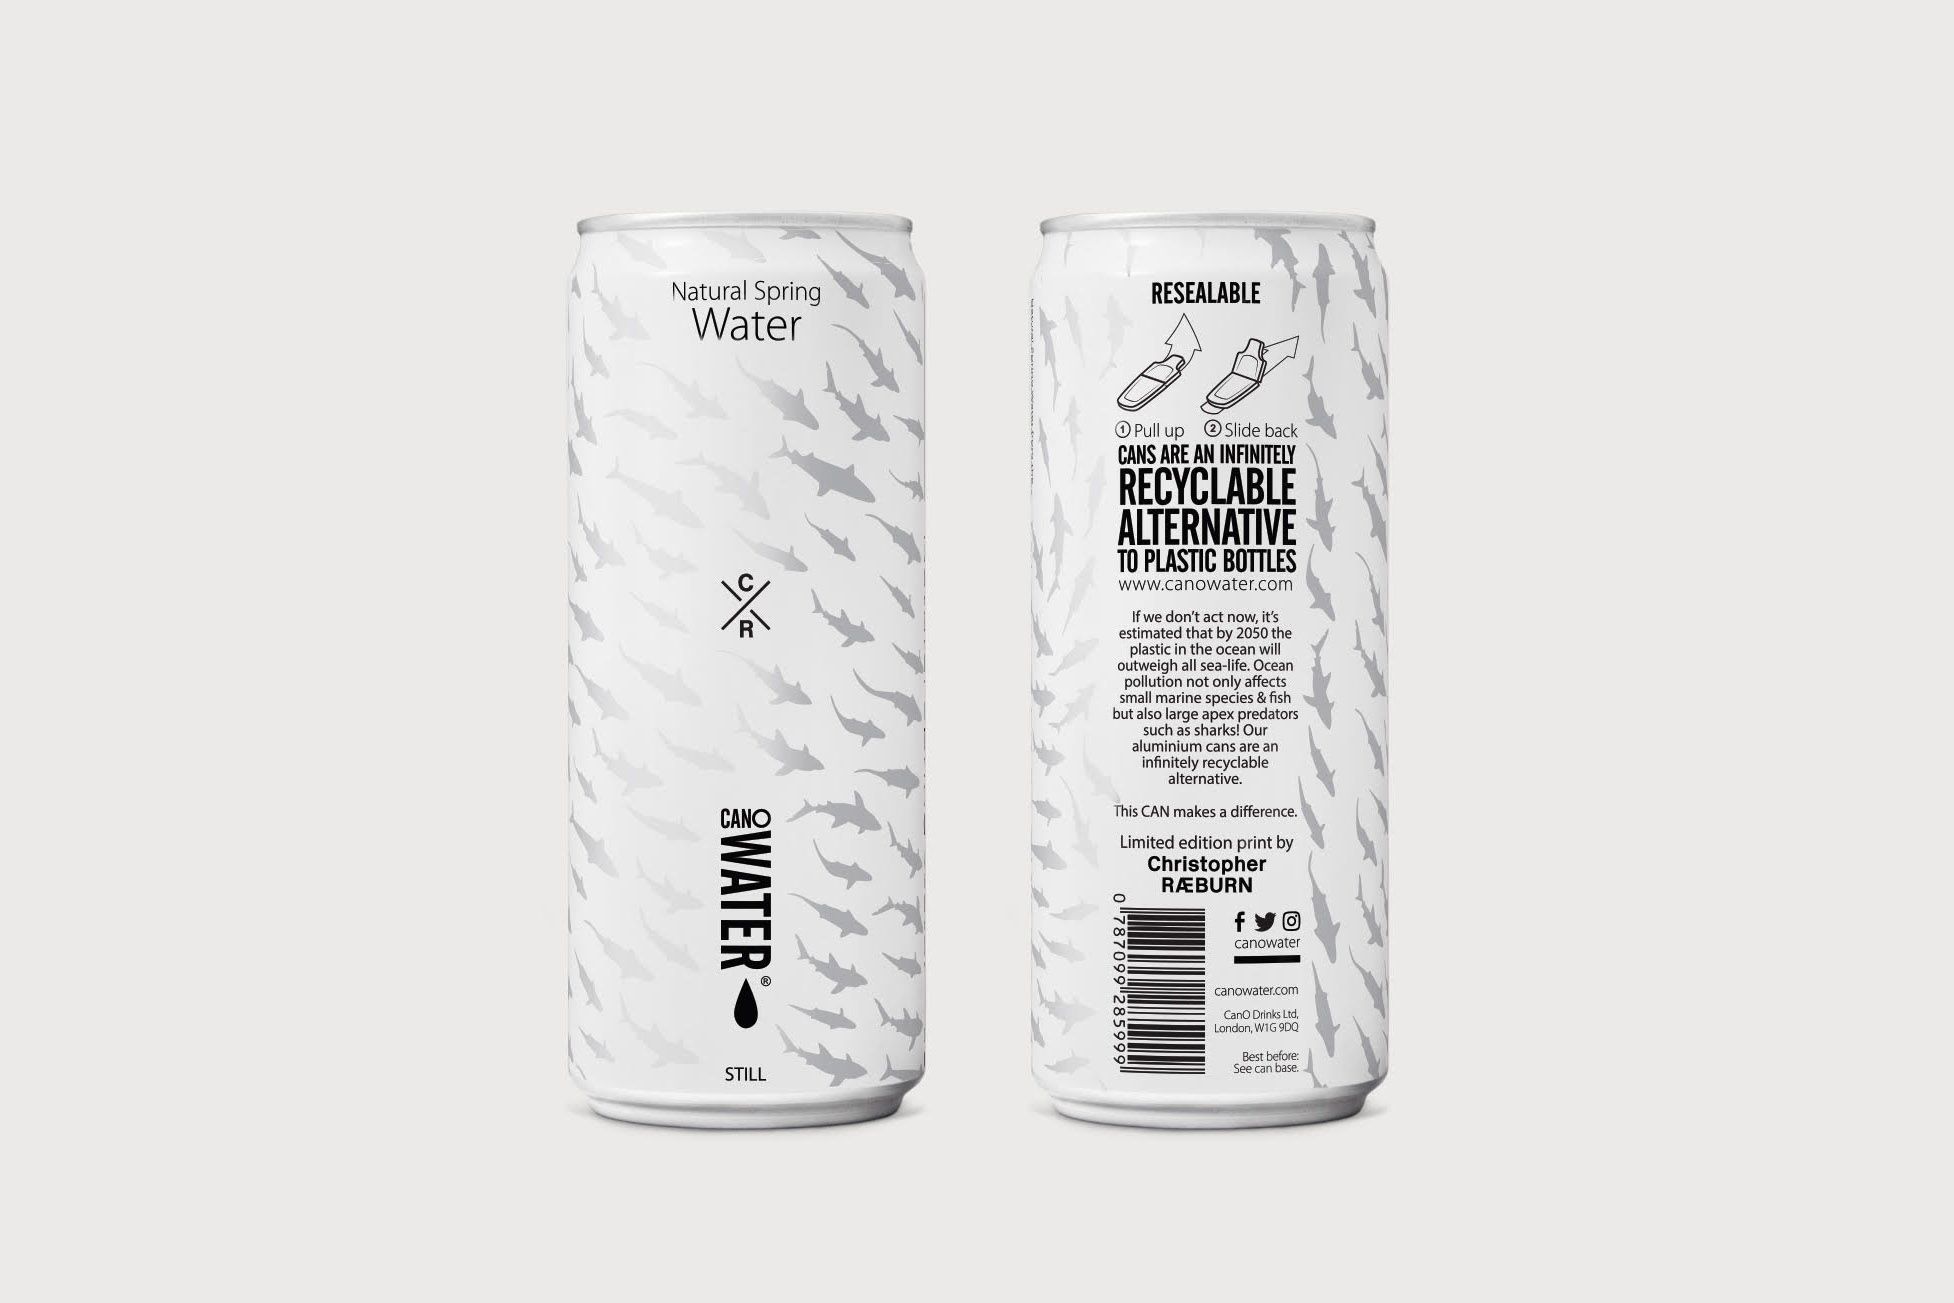 CanO Water × CR can for ZSL London Zoo